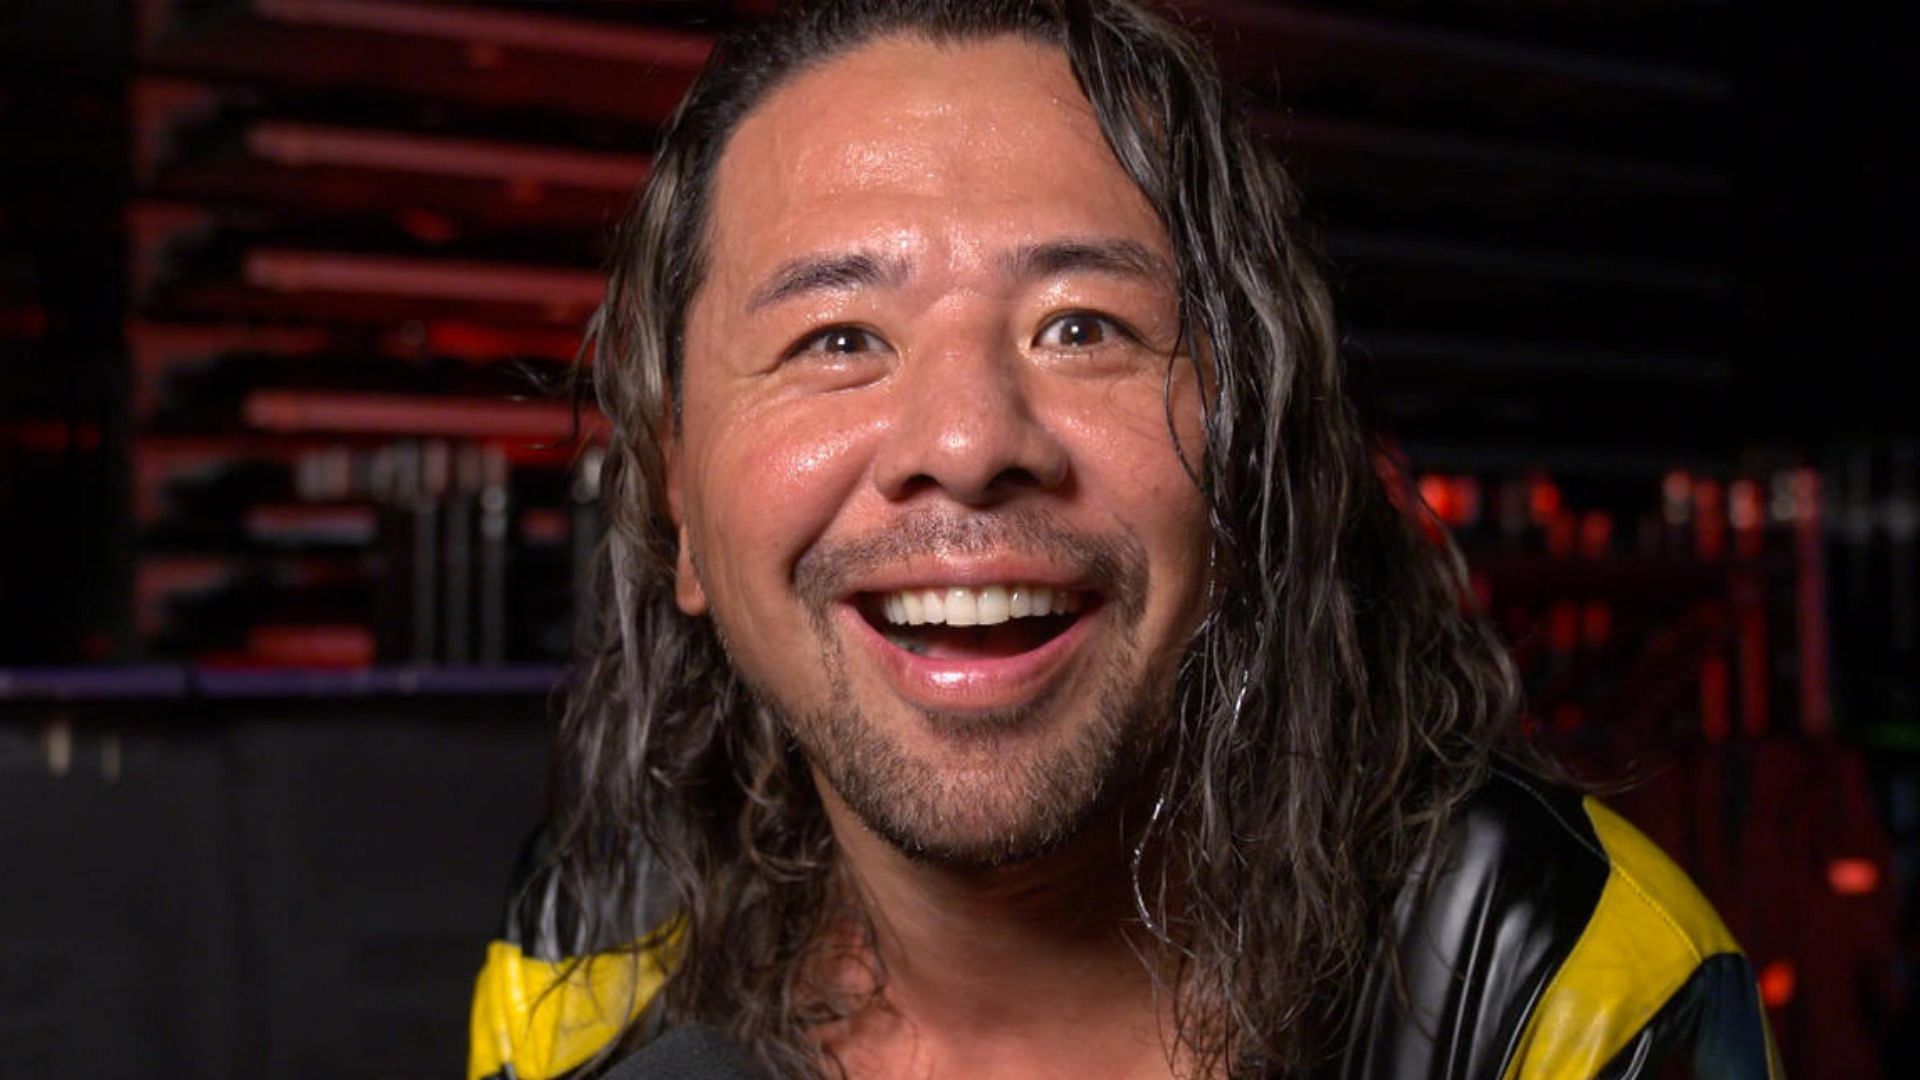 Nakamura has been cutting cryptic promos as of late.